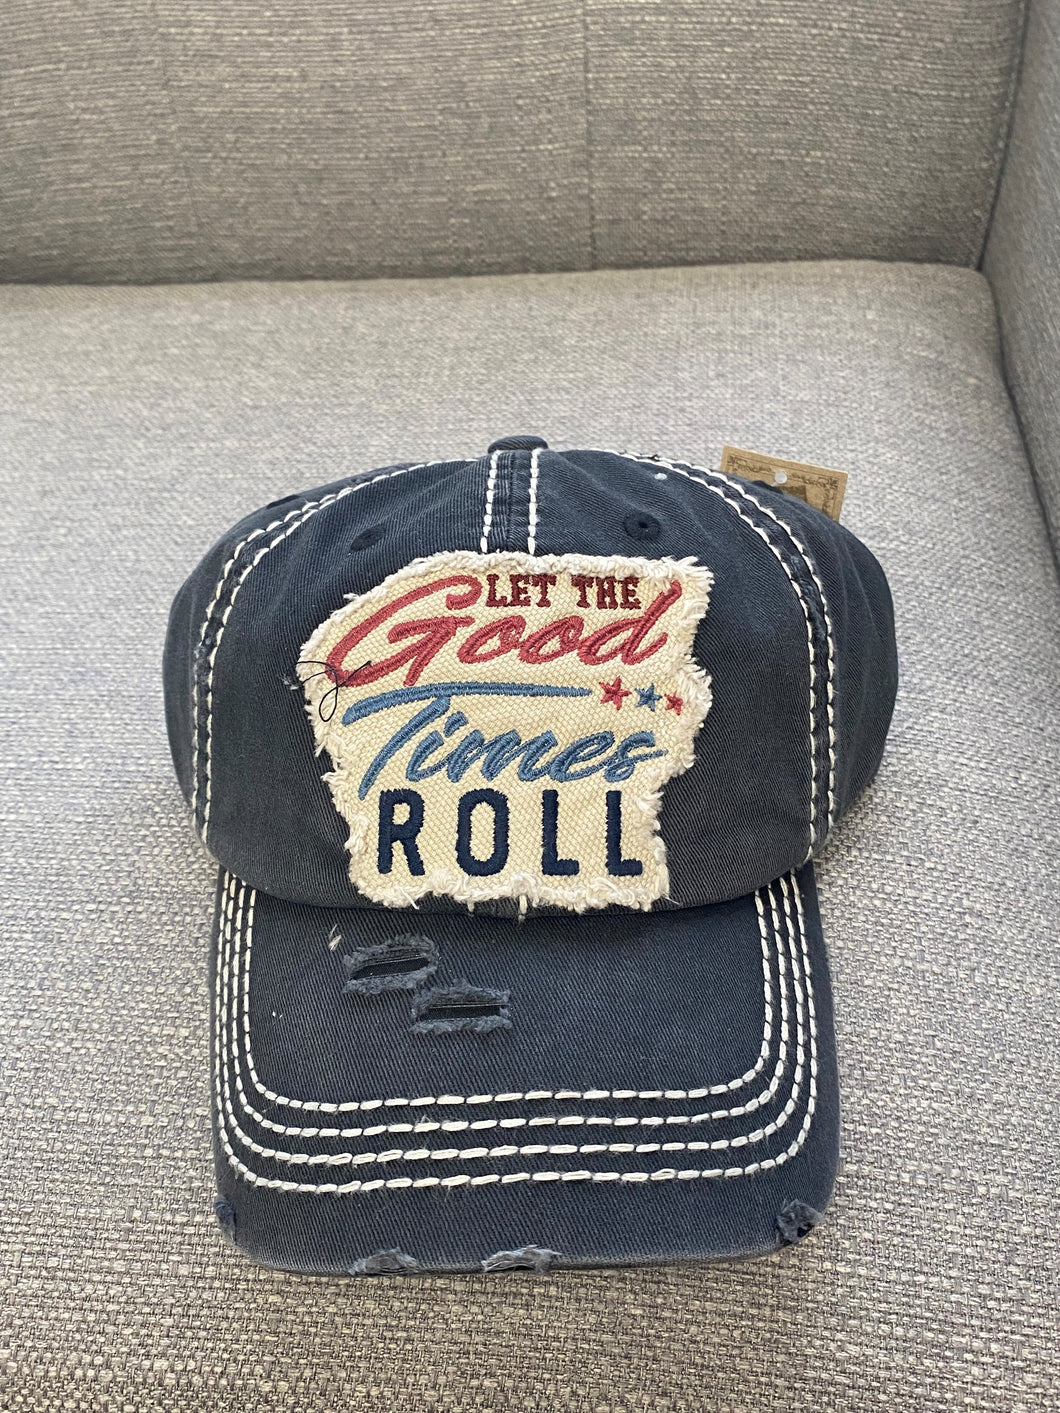 Let the Good Times Roll Cap